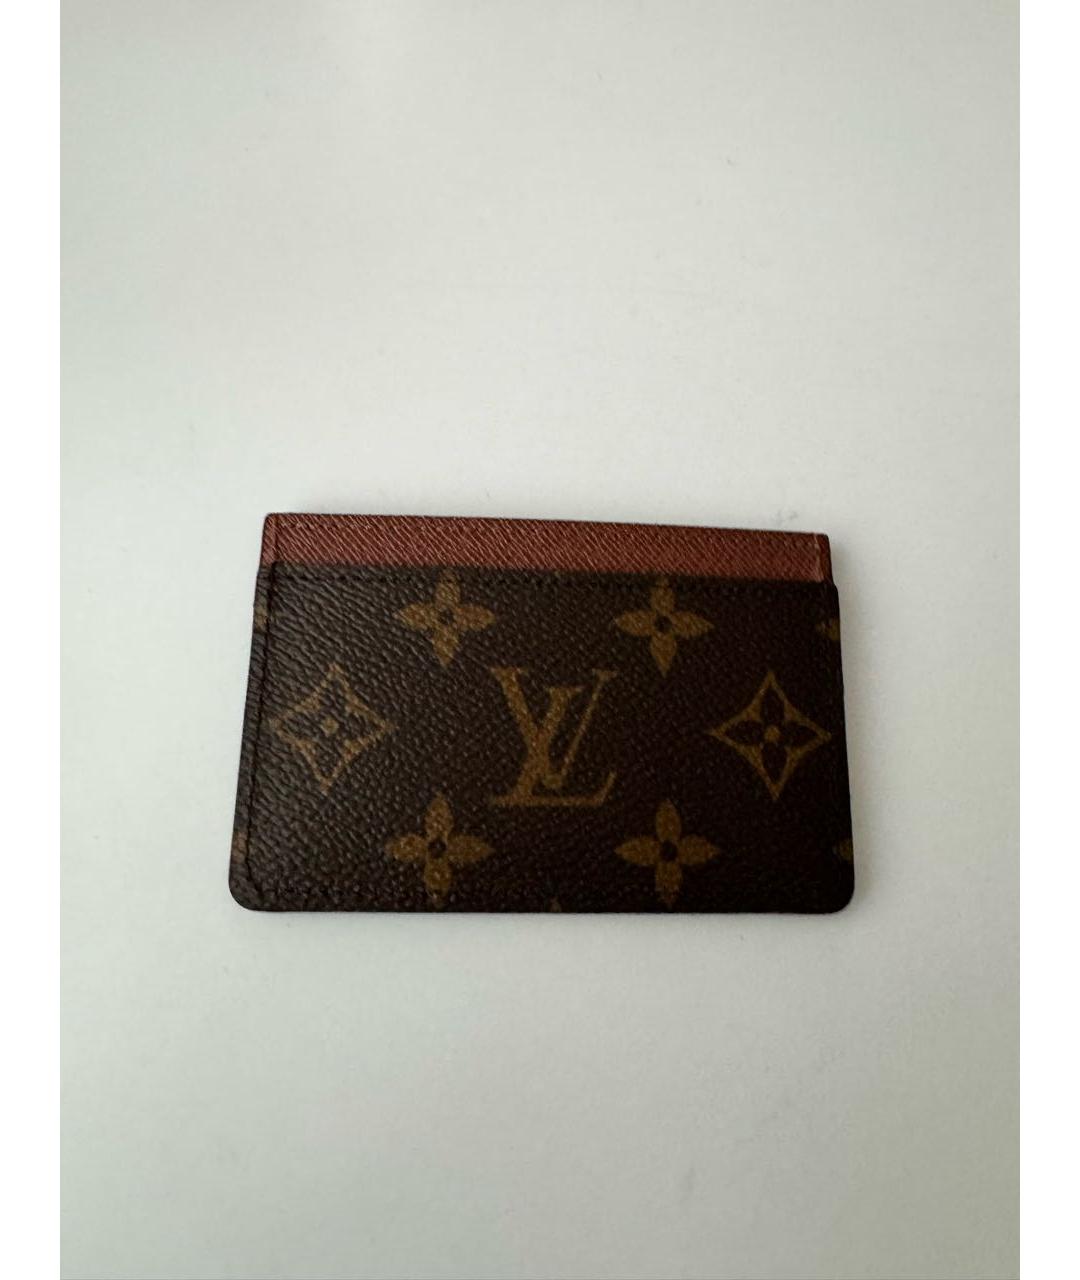 LOUIS VUITTON PRE-OWNED Коричневый кардхолдер, фото 4